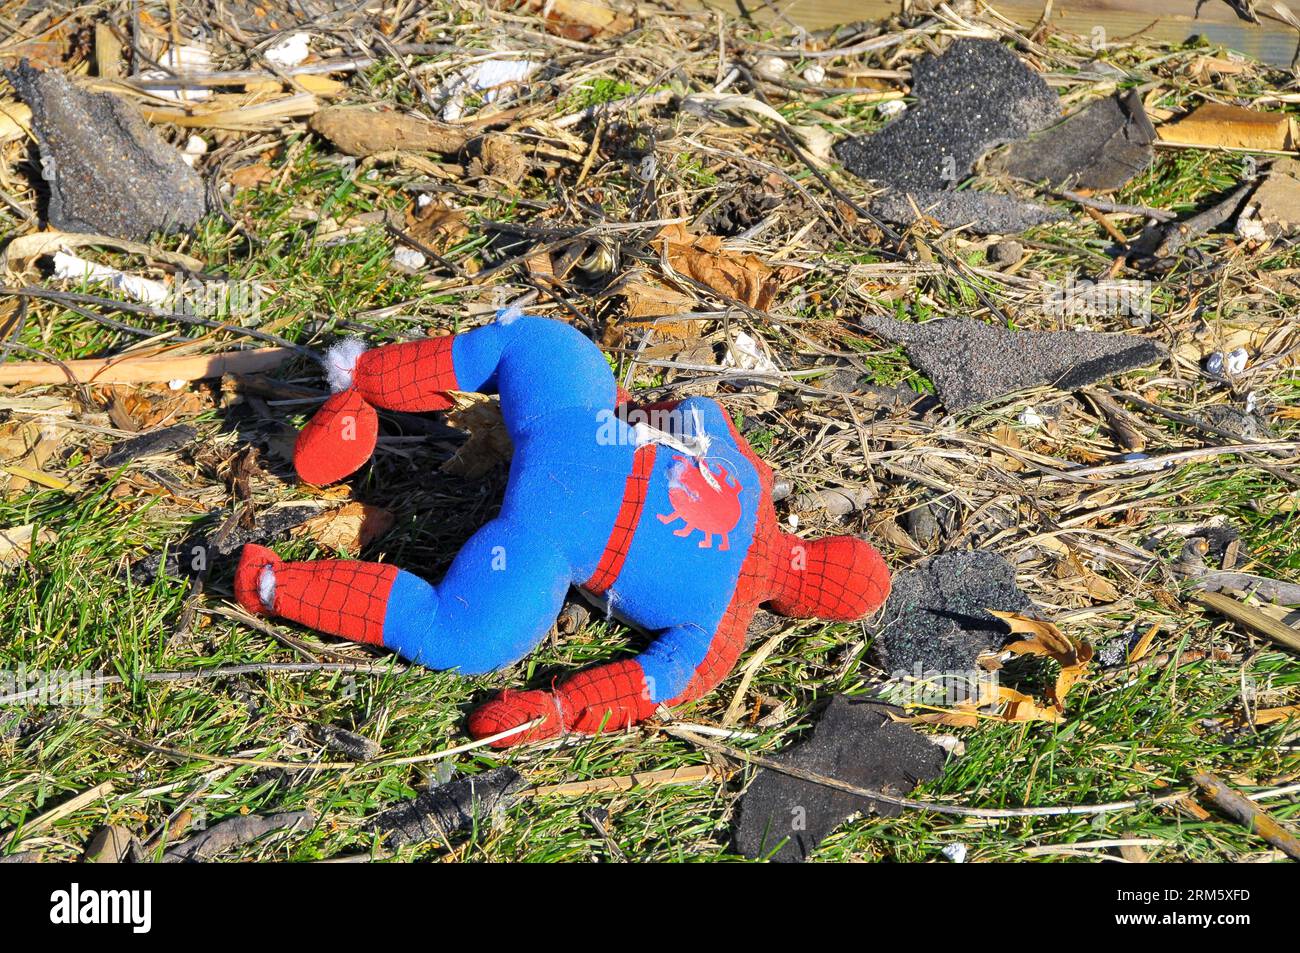 Bildnummer: 60732971  Datum: 19.11.2013  Copyright: imago/Xinhua ILLINOIS, Nov. 19, 2013 (Xinhua) -- A spiderman toy lies in ruins after a tornado attack in the town of Washington in Illinois, the United States, on Nov. 19, 2013. At least 16 were killed during tornado attacks on Sunday, according to the National Weather Service. (Xinhua/Zhang Baoping)(ybg) US-ILLINOIS-TORNADO PUBLICATIONxNOTxINxCHN Gesellschaft USA Naturkatastrophe x0x xsk 2013 quer     60732971 Date 19 11 2013 Copyright Imago XINHUA Illinois Nov 19 2013 XINHUA a Spiderman Toy Lies in Ruins After a Tornado Attack in The Town o Stock Photo